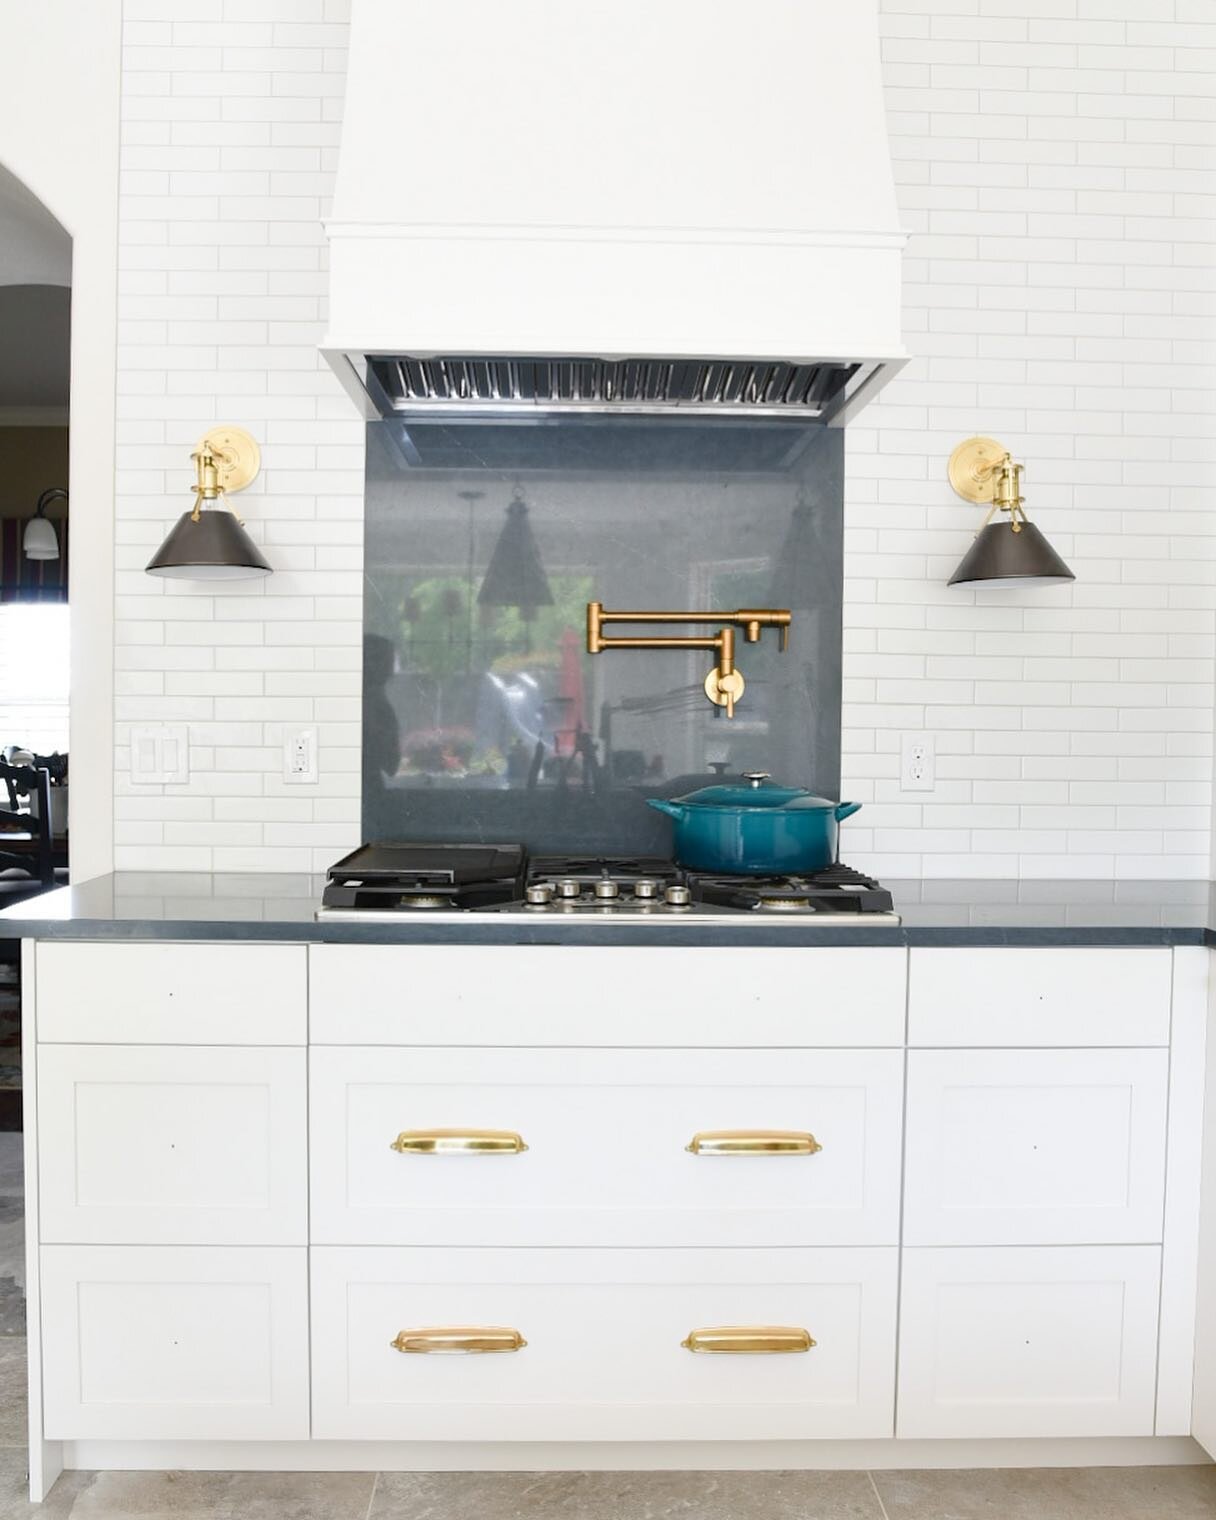 Missing some hardware but we love how this beautiful kitchen remodel turned out! #northcabinetco